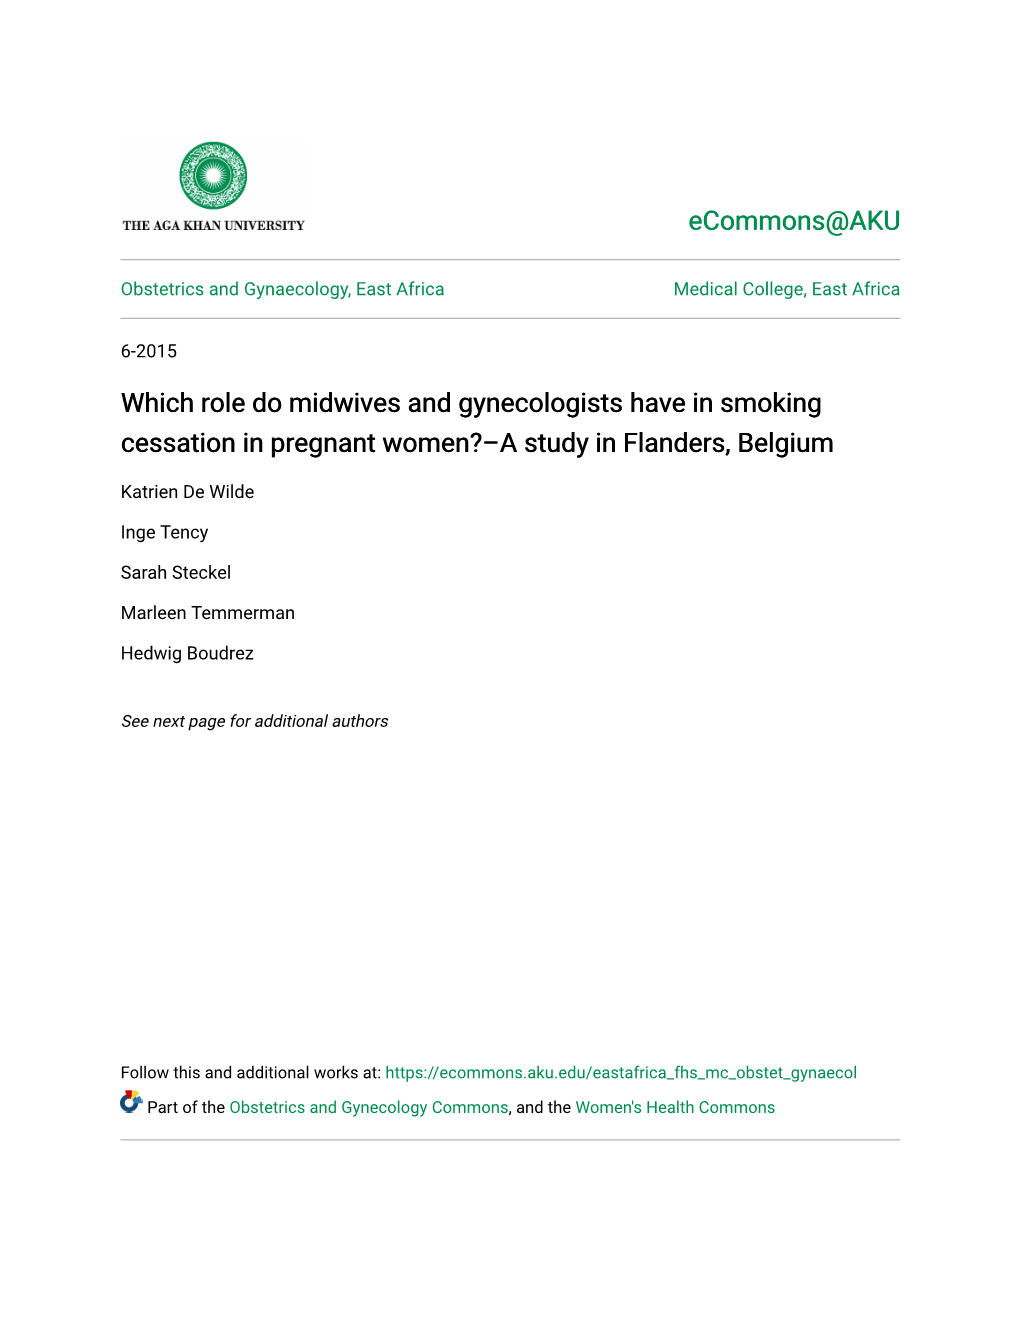 Which Role Do Midwives and Gynecologists Have in Smoking Cessation in Pregnant Women?–A Study in Flanders, Belgium